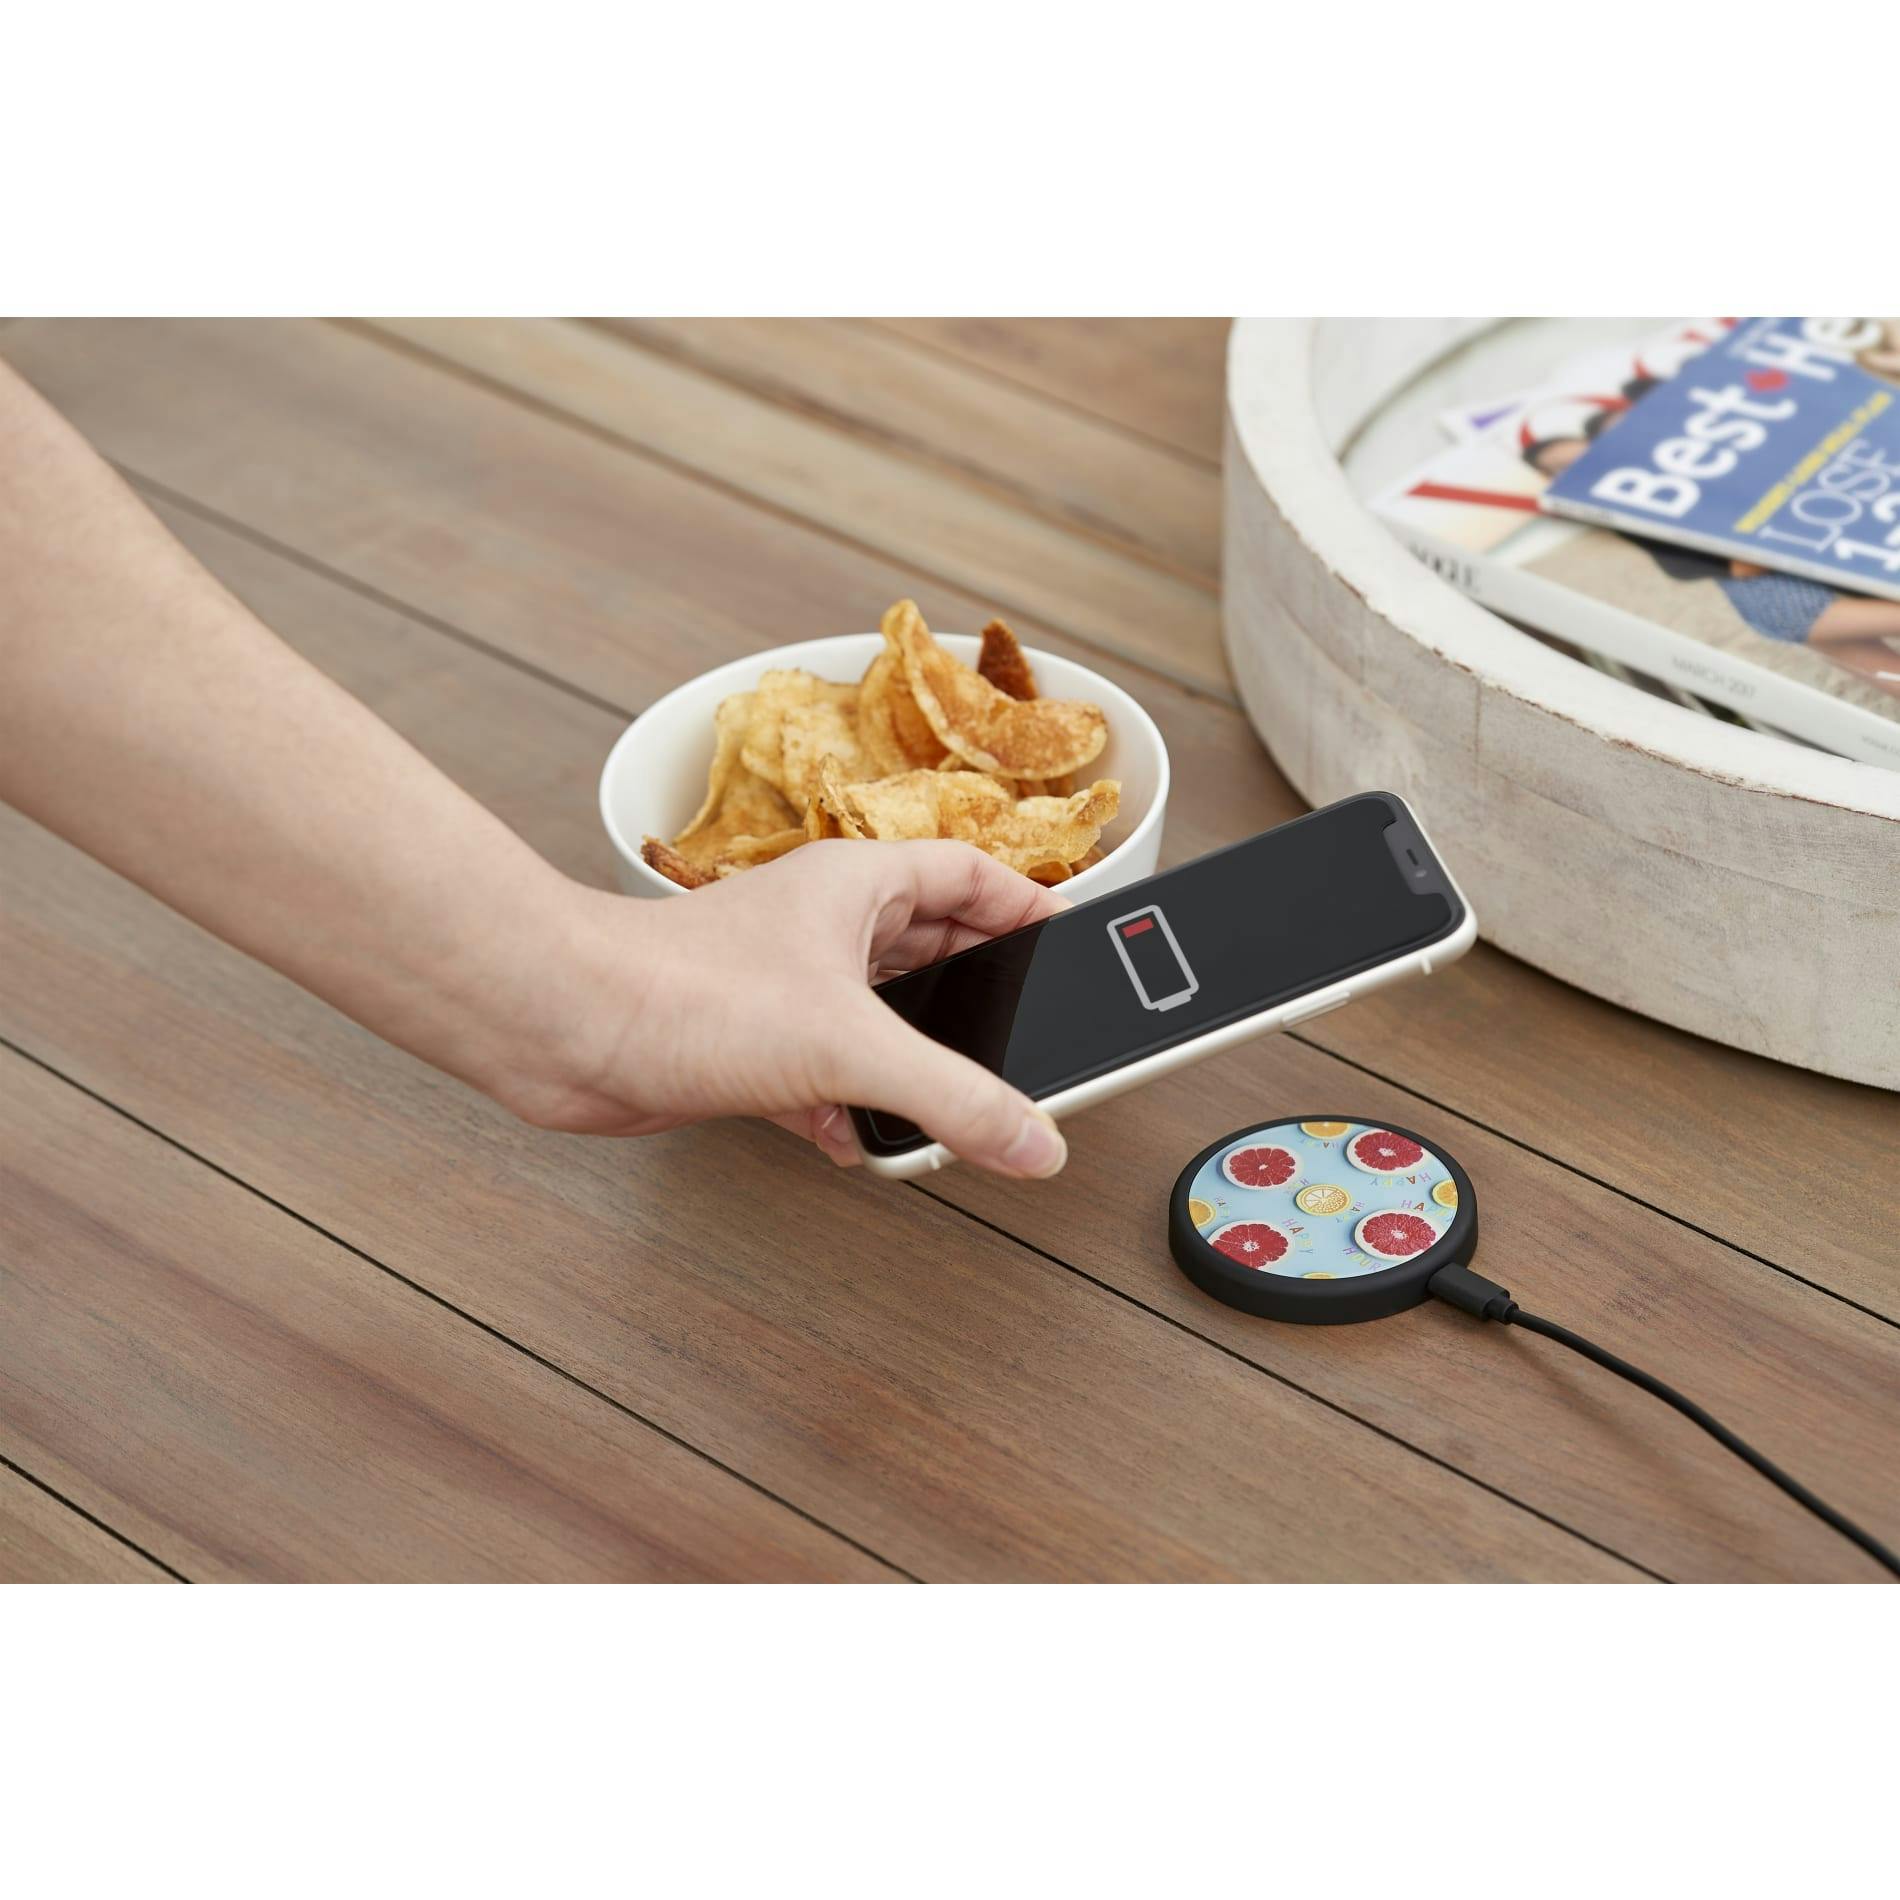 The Looking Glass Wireless Charging Pad - additional Image 4